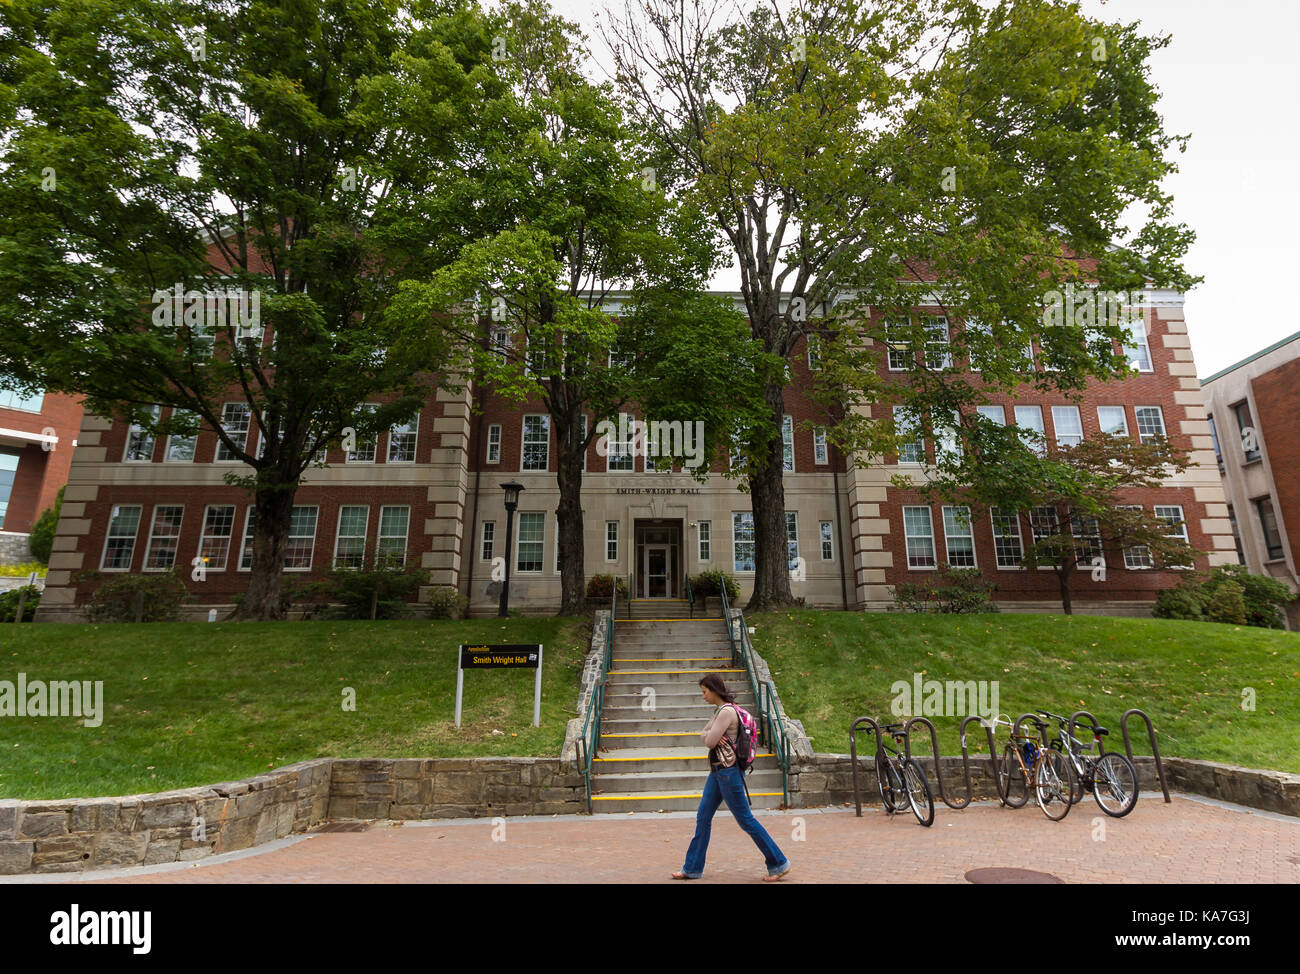 Smith-Wright Hall at Appalachian State University in Boone, NC.  Built in 1940. Stock Photo